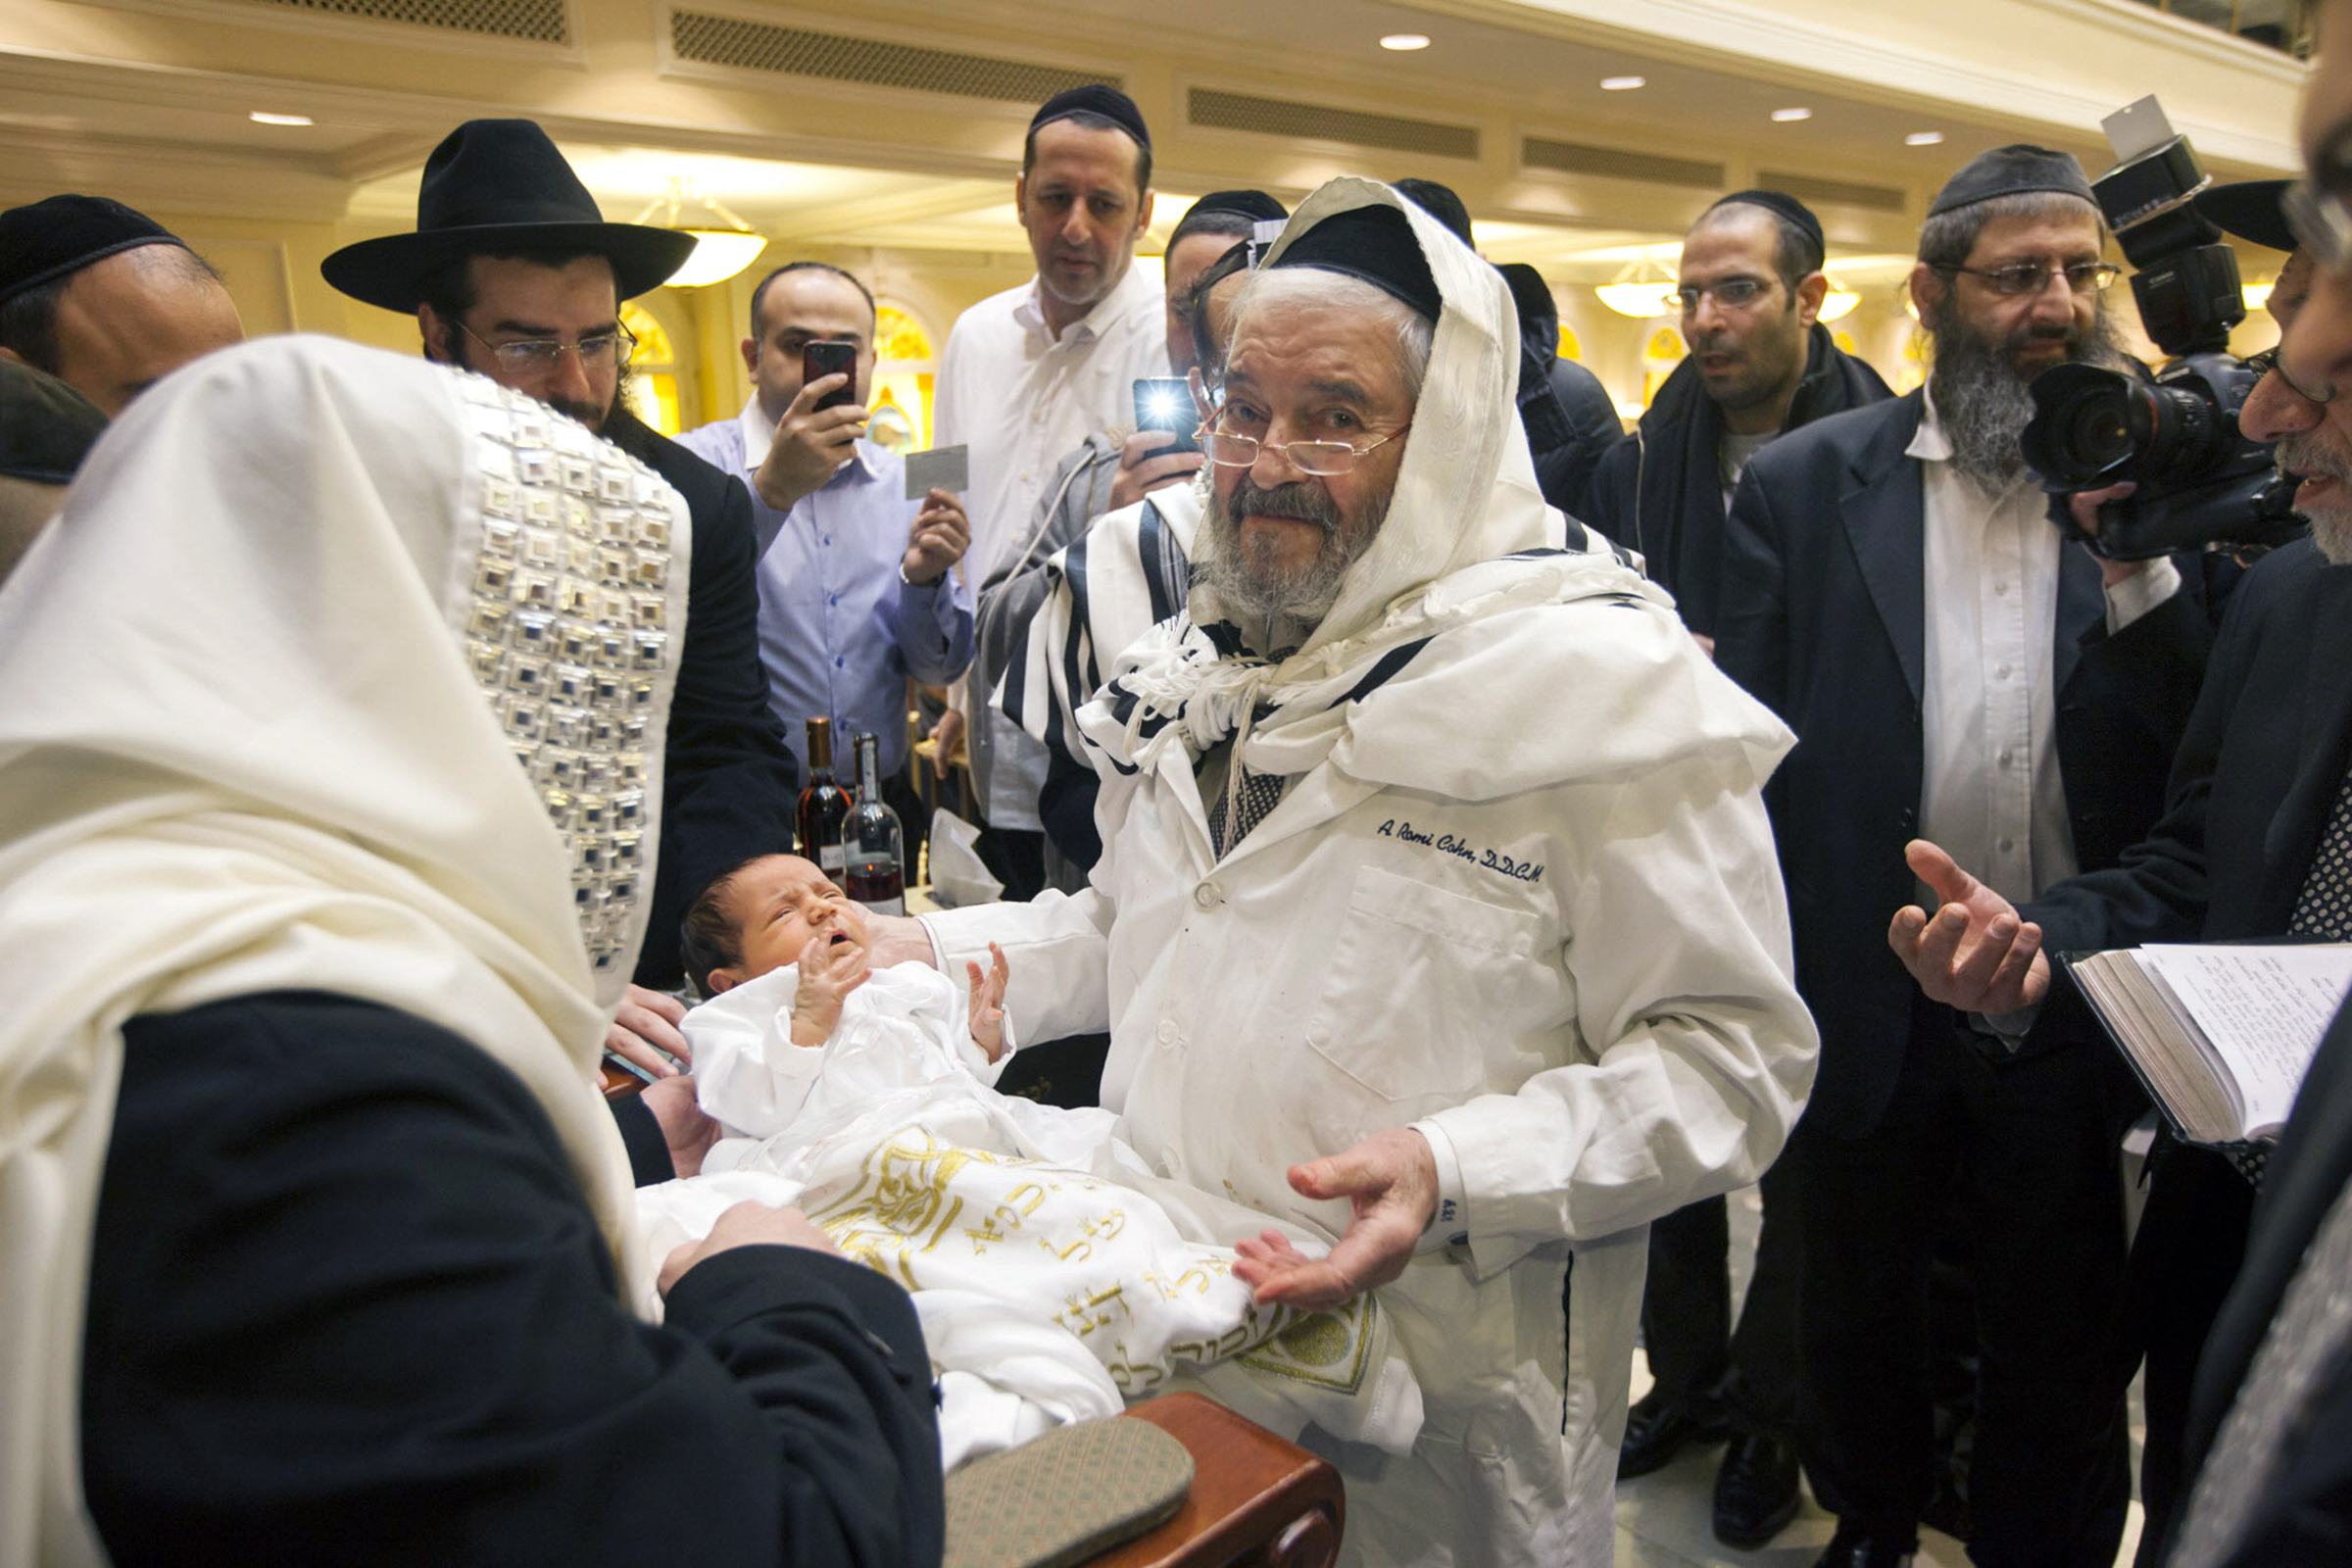 Romi Cohn, a mohel, performed a circumcision at Congregation Ahaba Ve Ahva on Ocean Parkway in Brooklyn, in 2014. (Michael Nagle—The New York Times/Redux)